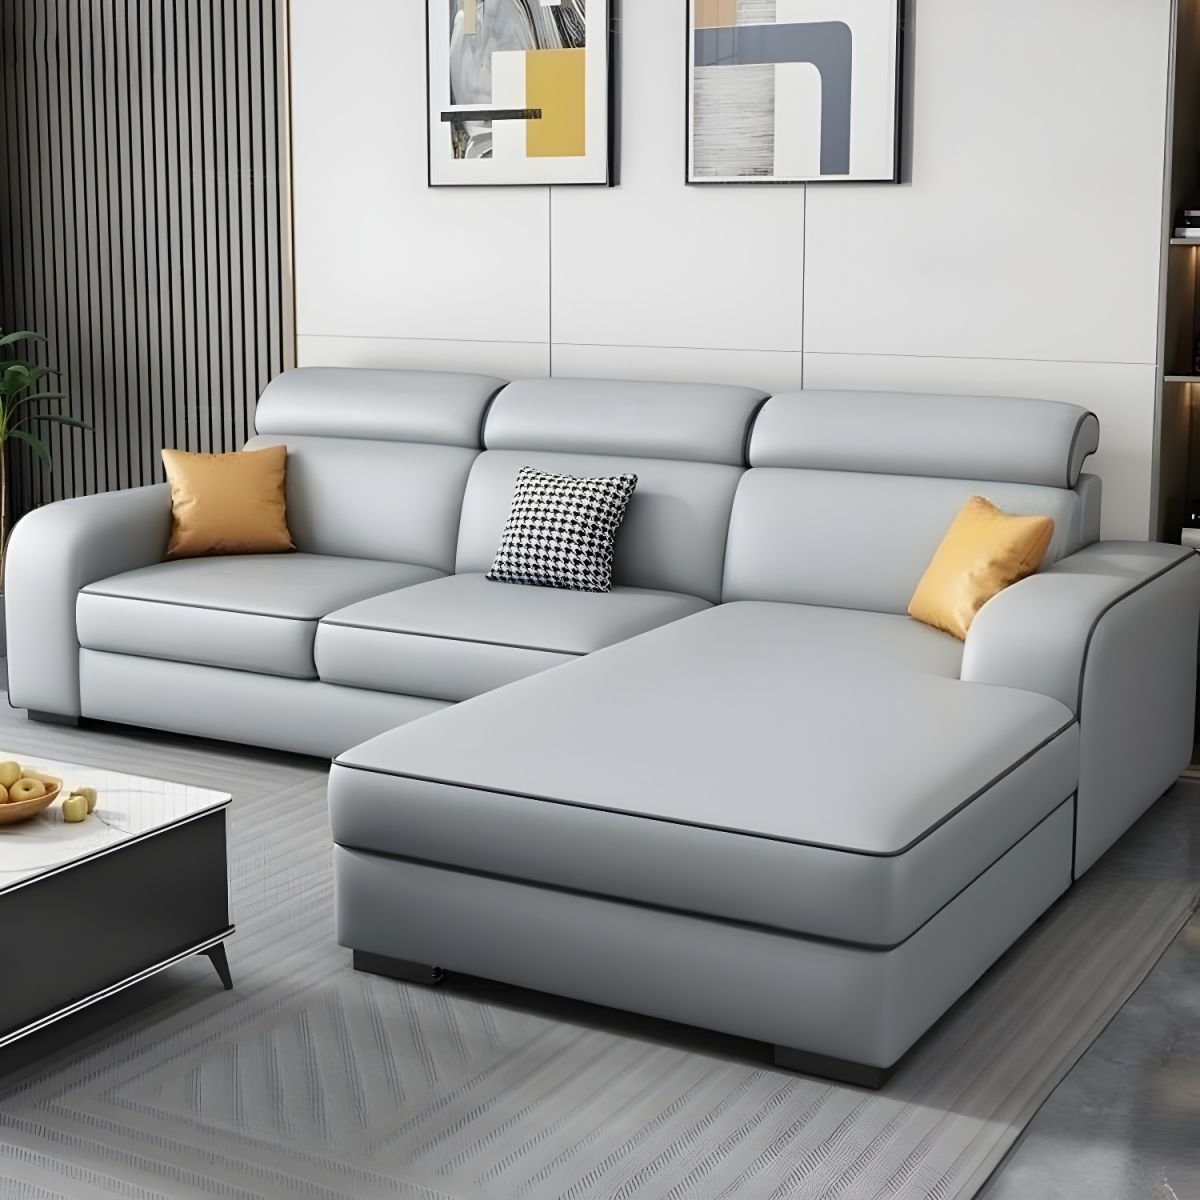 Contemporary Sectional Sofa with Adjustable Pillow and Scratch Resistant Upholstery - Anti Cat Scratch Leather 85"L x 63"W x 31"H Light Gray